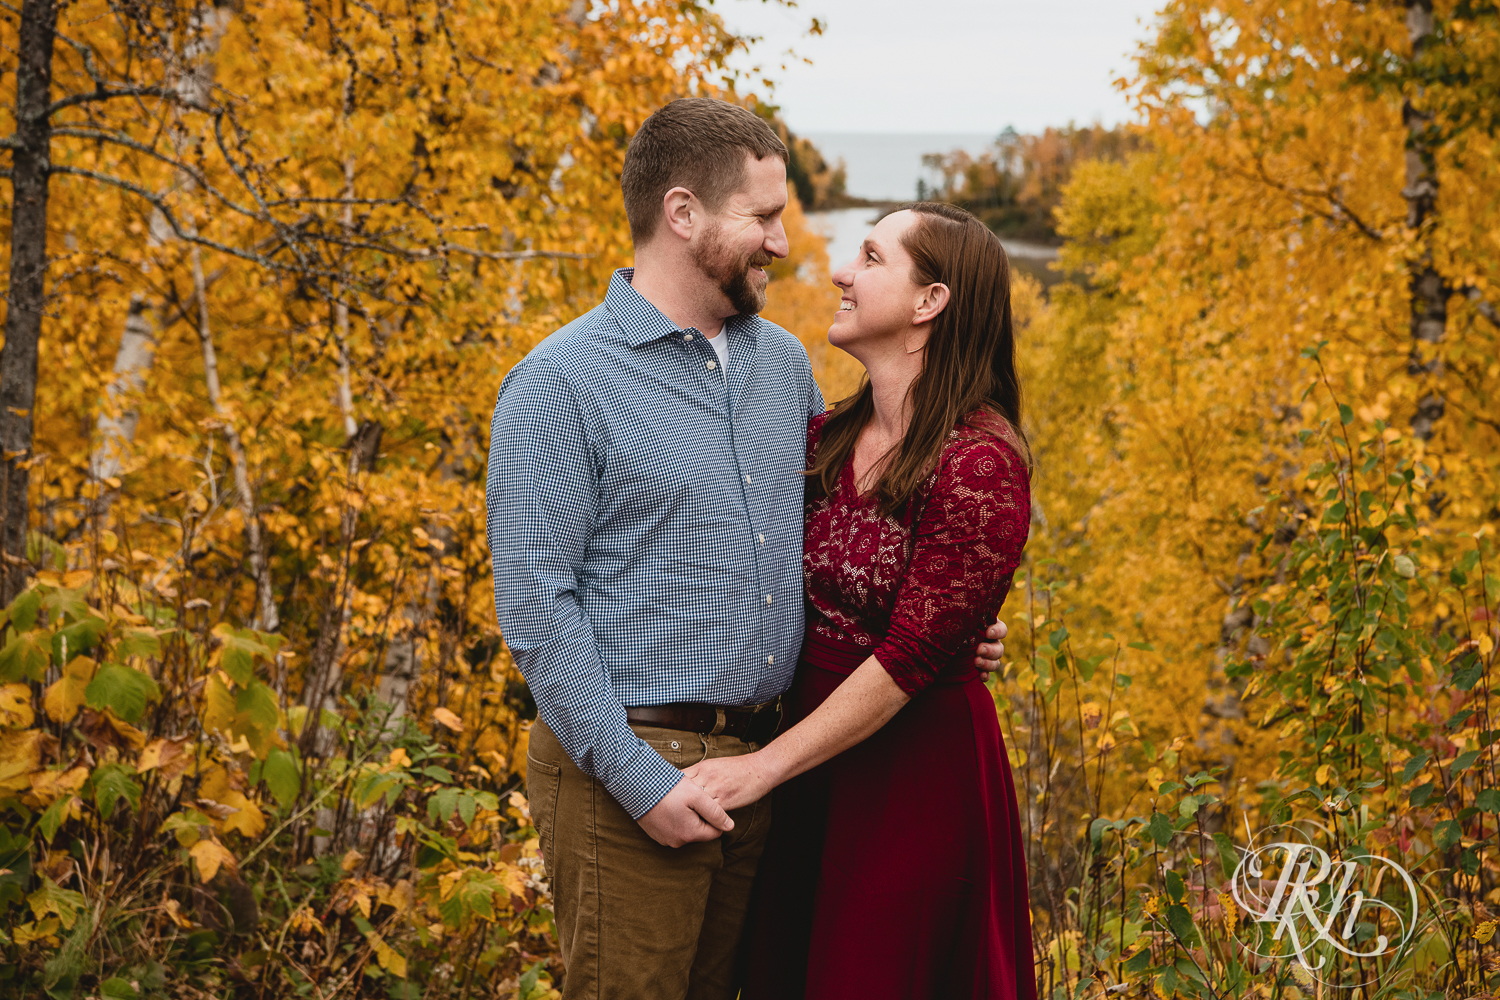 Man and woman in red dress smile in front of fall colors in Gooseberry Falls in Two Harbors, Minnesota.